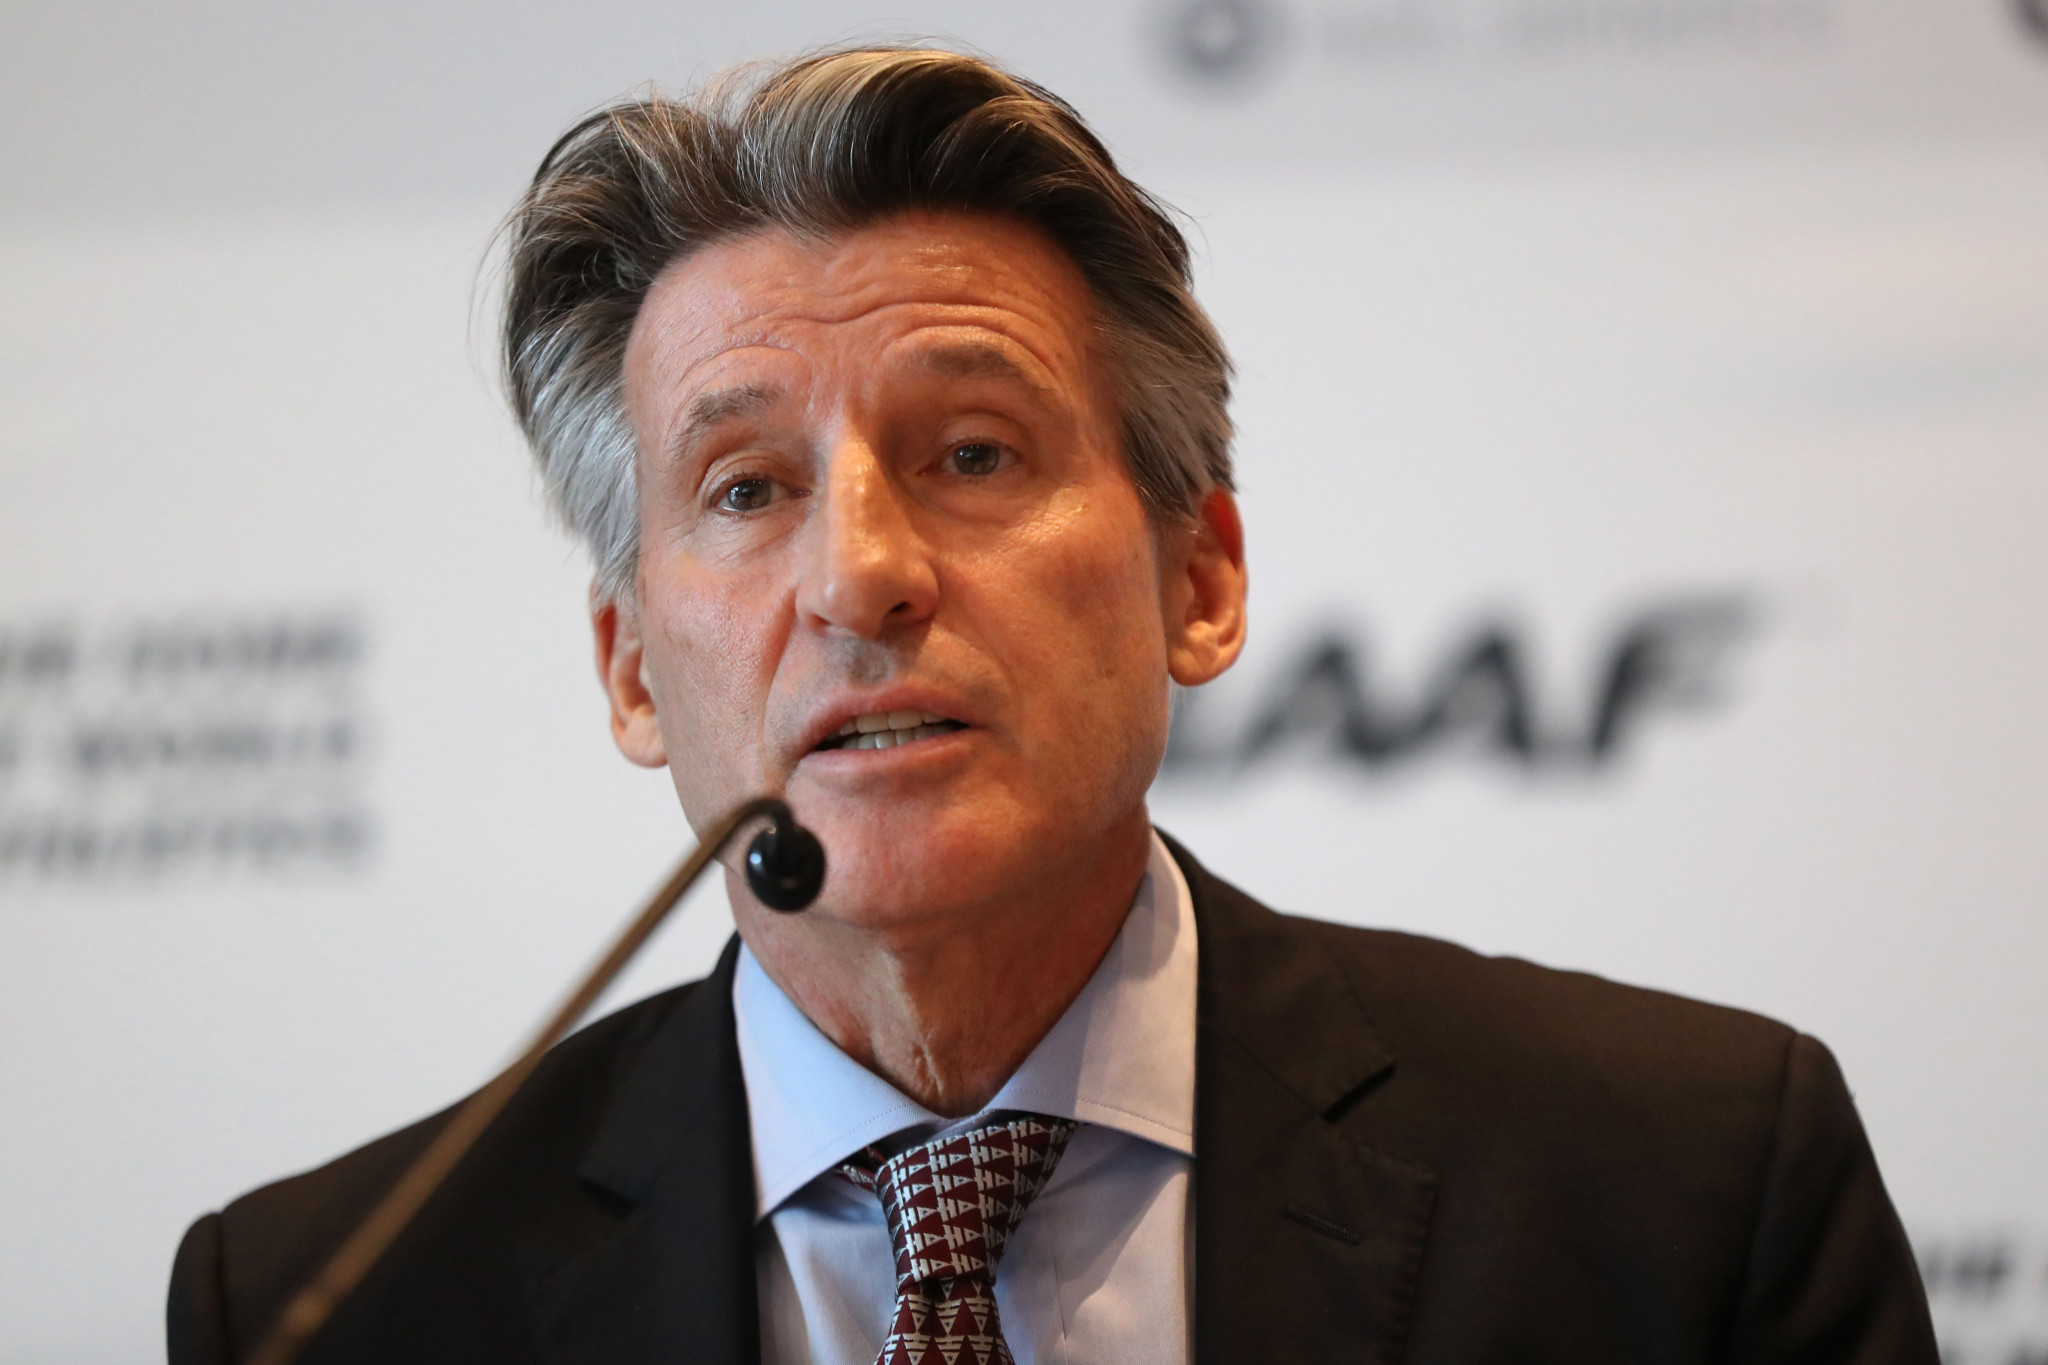 IAAF President Sebastian Coe said the new guidance has been brought in after Russia's ban was extended ©Getty Images